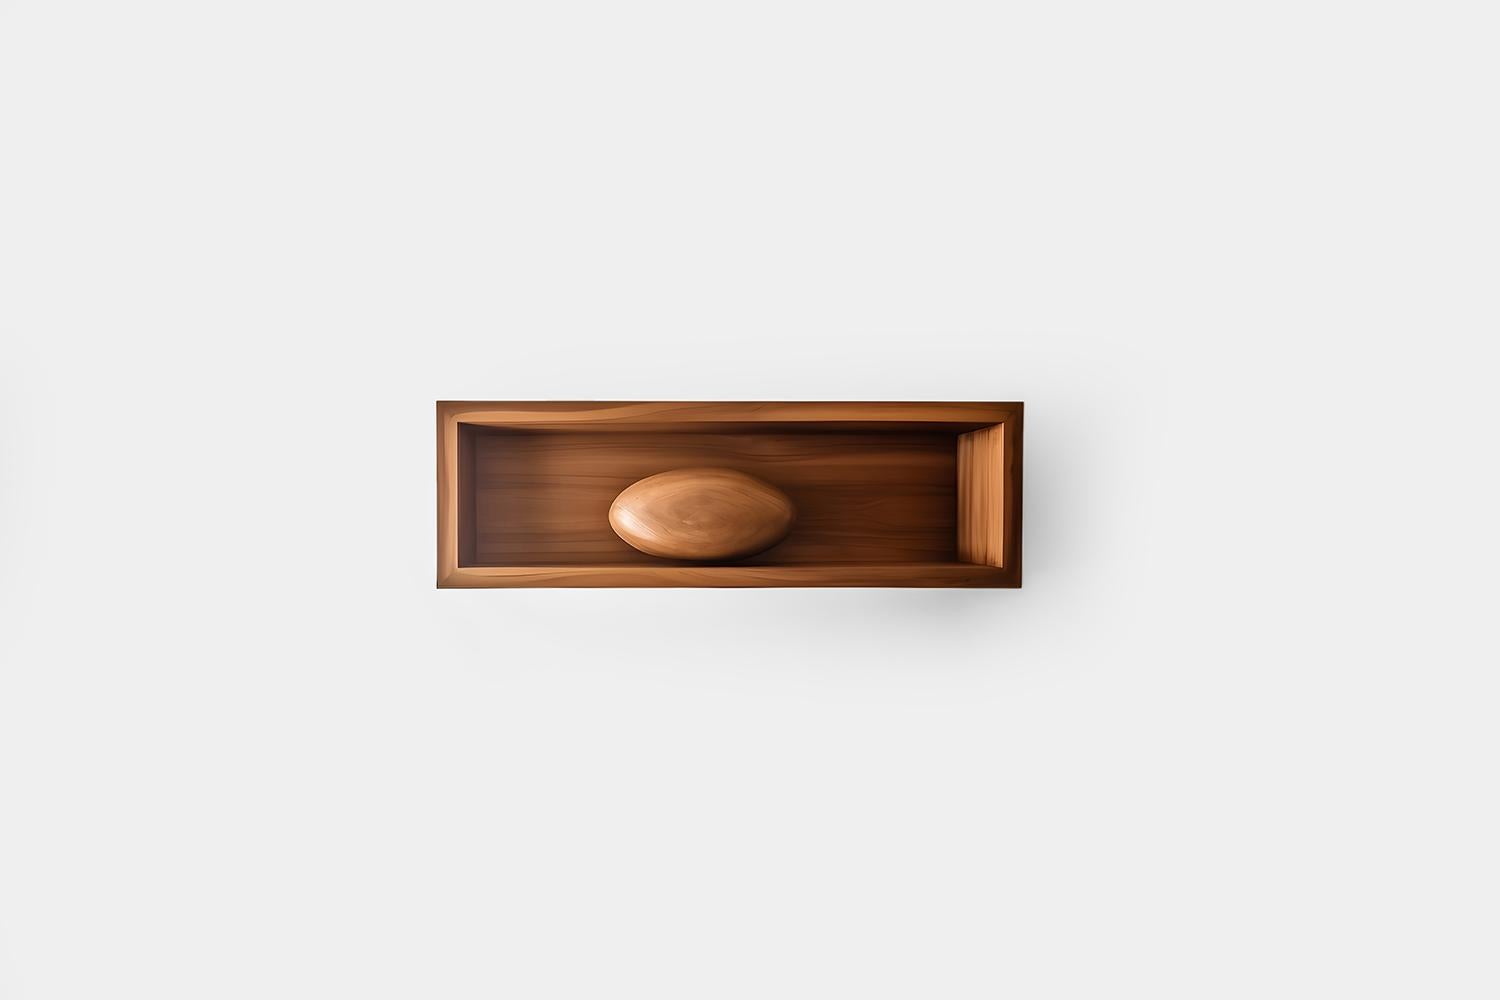 Rectangular Floating Shelf with Close Back and One Large Sculptural Wooden Pebble Accent, Sereno by Joel Escalona

—

What happens when the practical becomes art?
What happens when ornamentation gains significance?

Those were the questions Joel